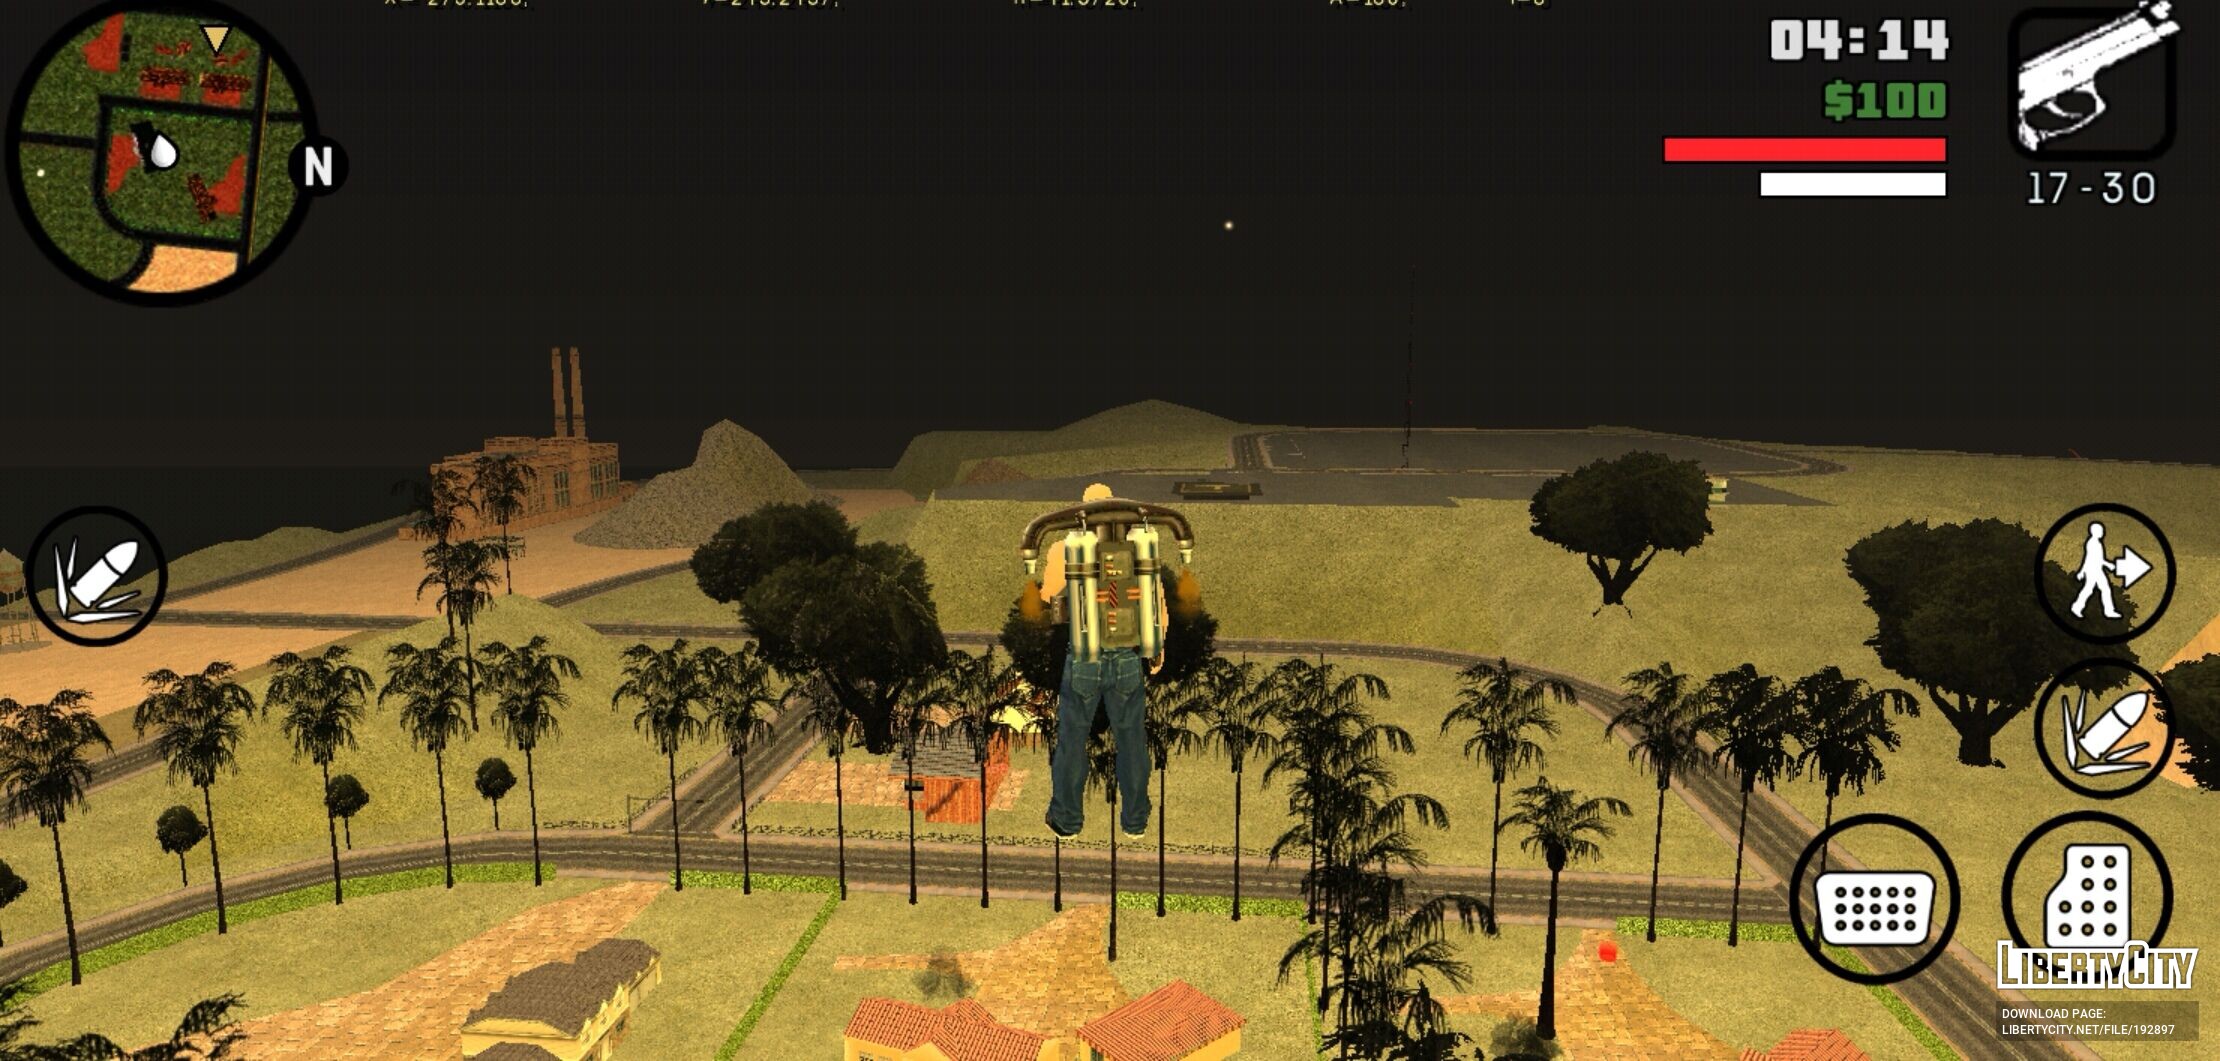 Global Magzine в X: „Play GTA San Andreas Multiplayer on Android